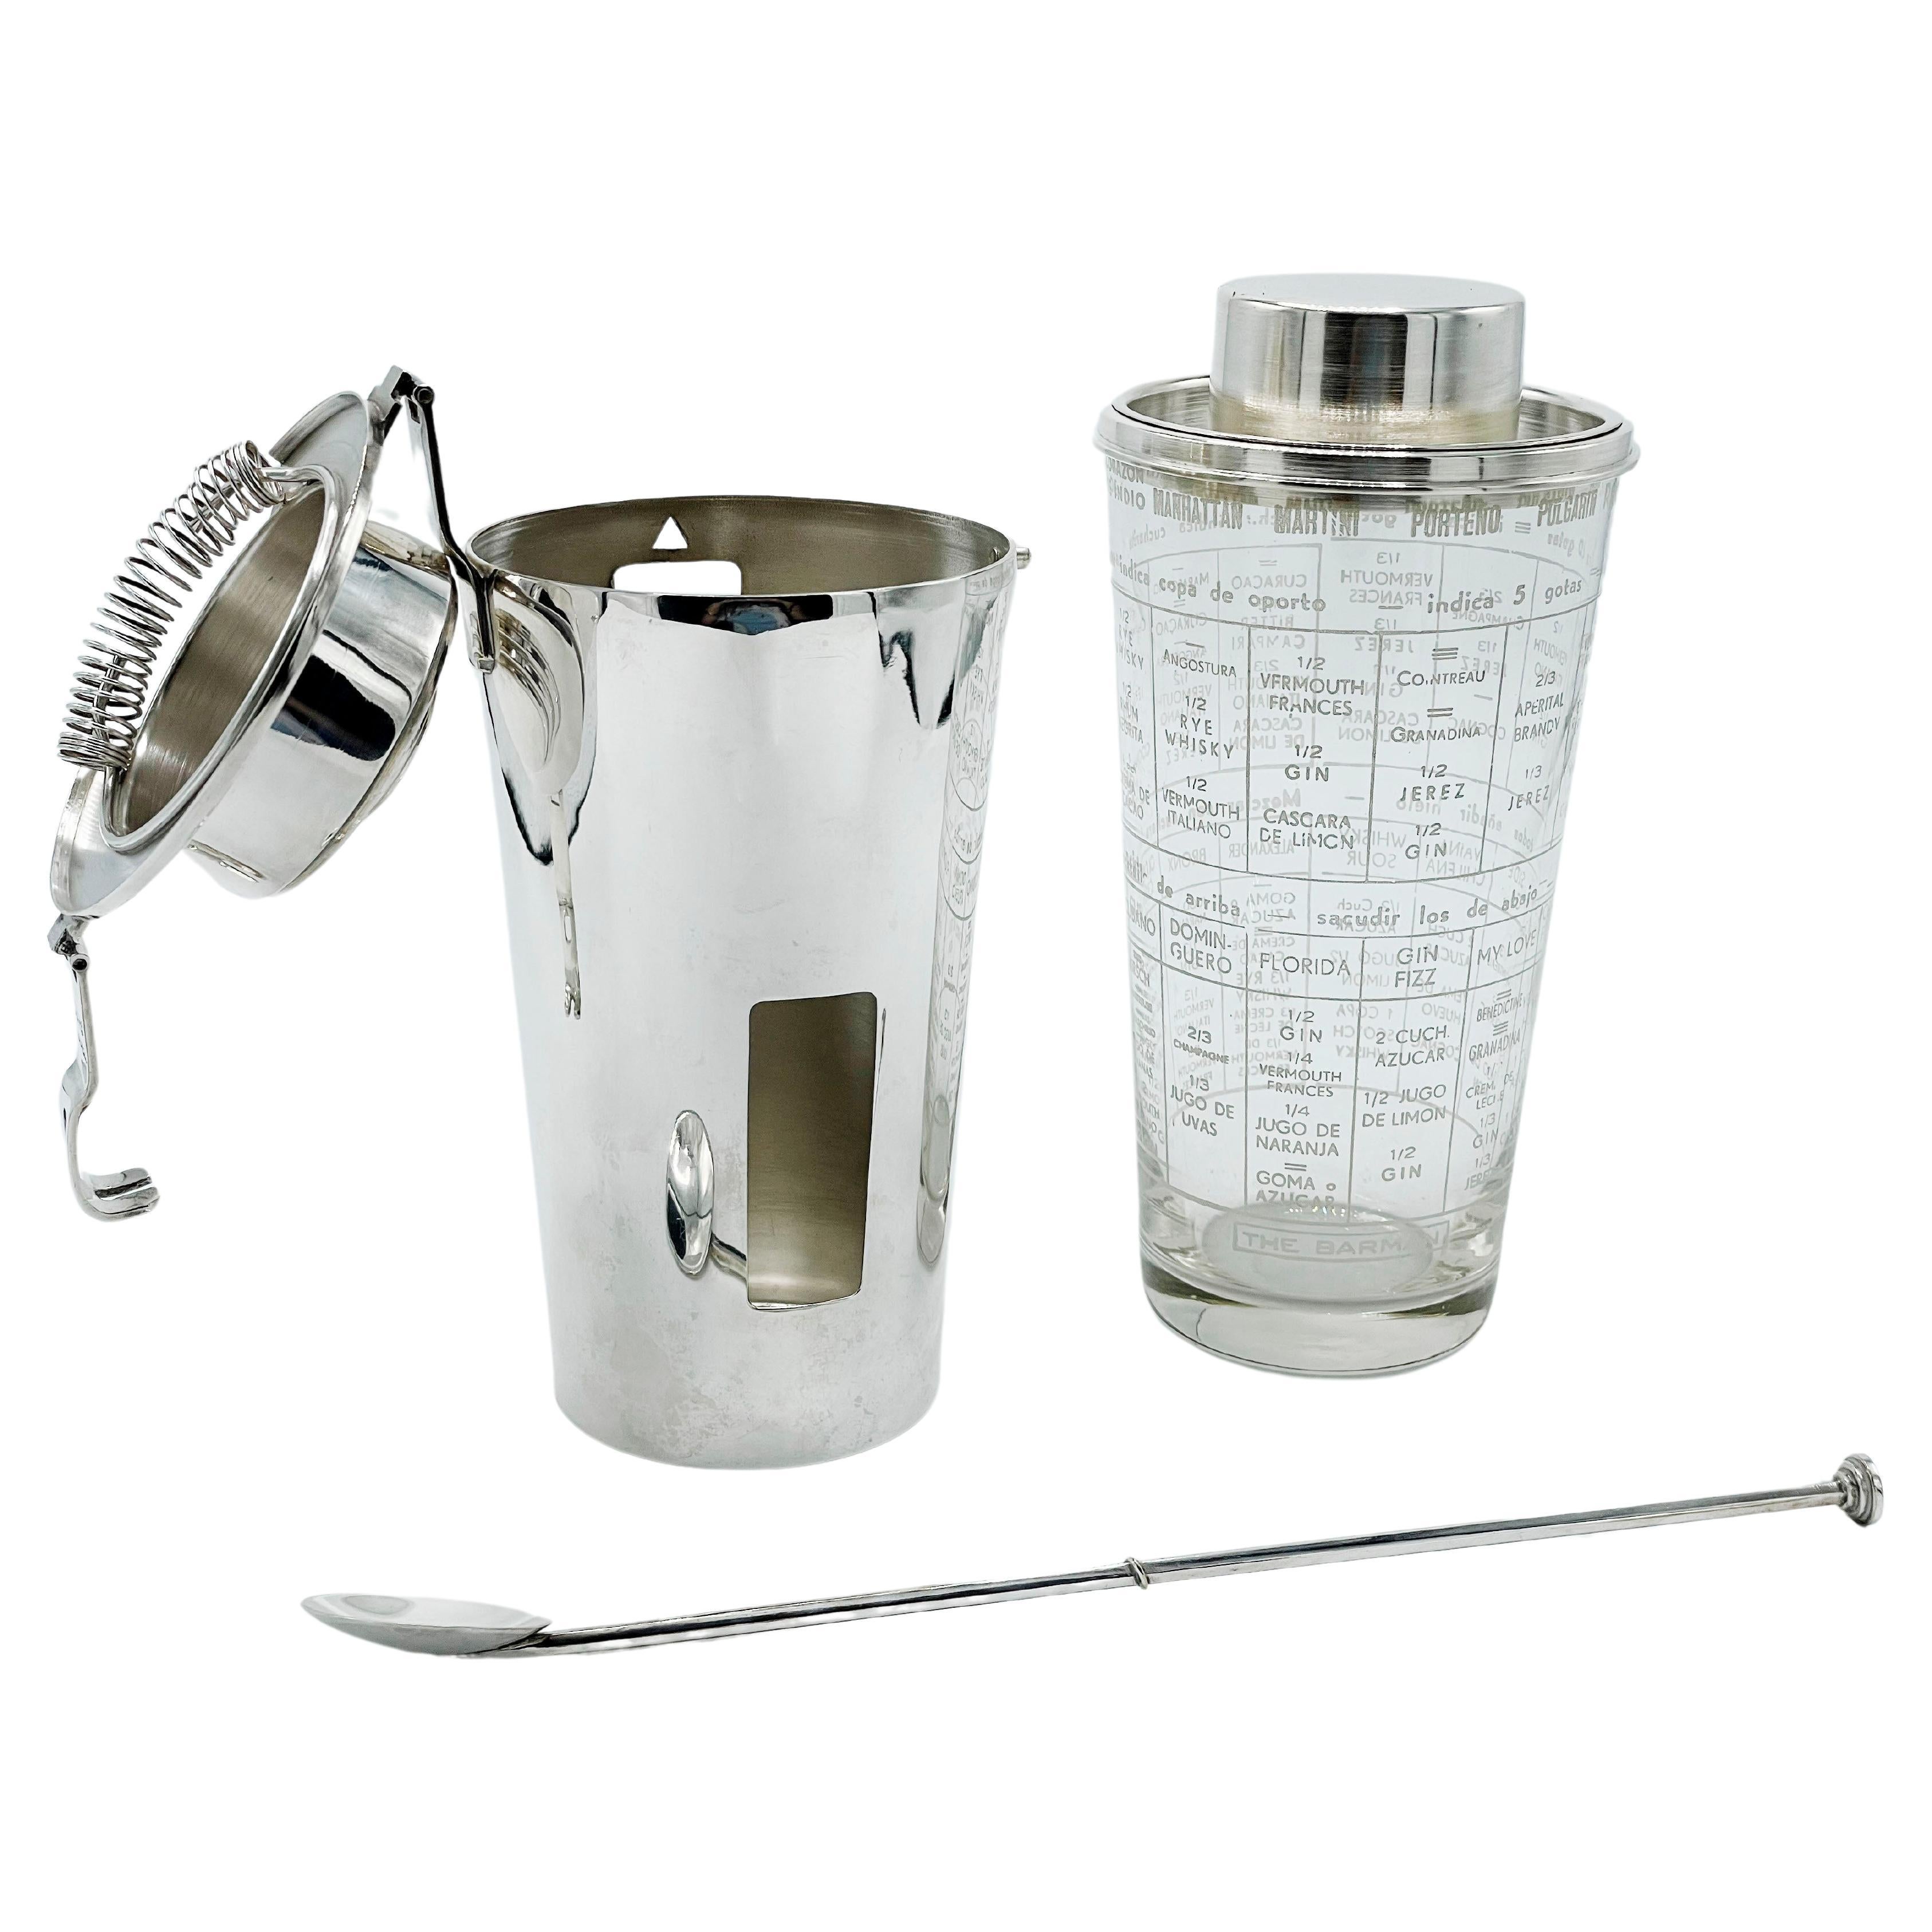 Art Deco Recipes Cocktail Shaker “the Barman“ by Ghiso, France 1930’s For Sale